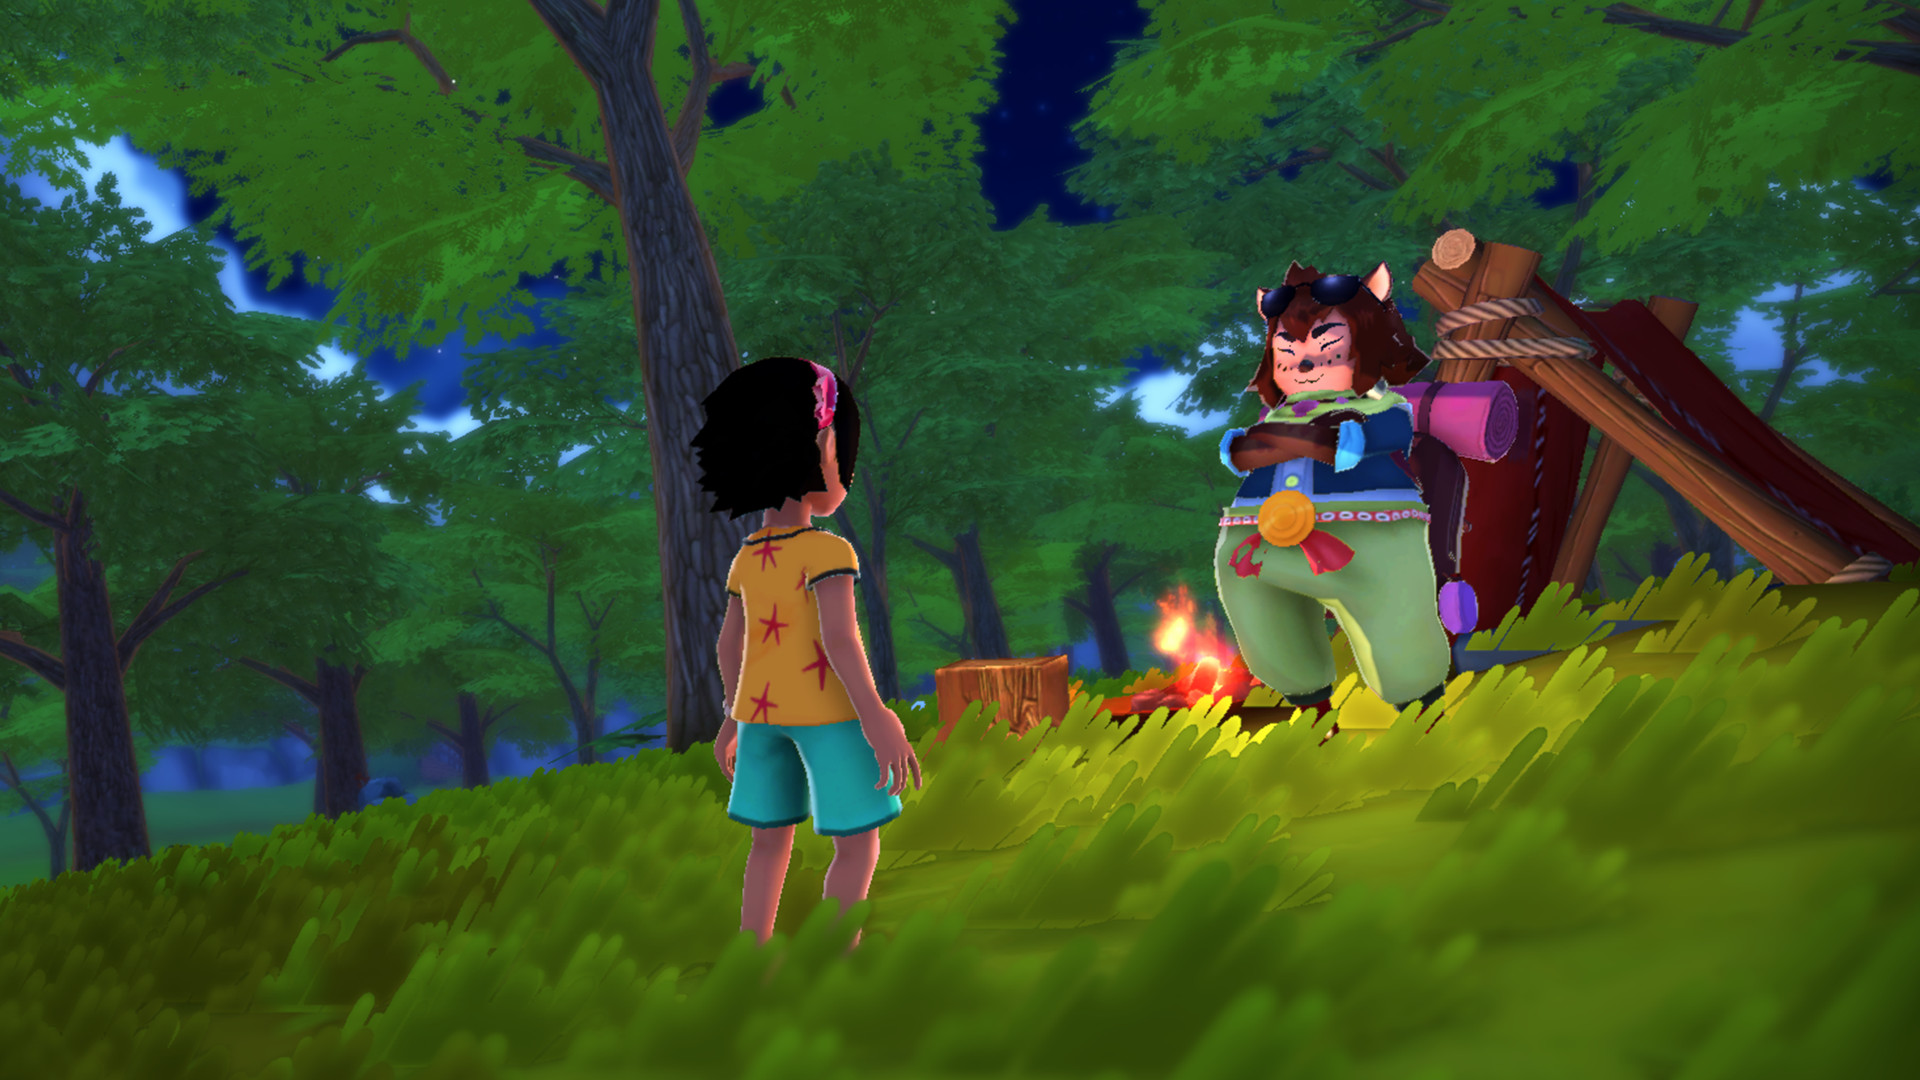 Screenshot from Summer in Mara. A young girl wearing a yellow shirt and blue shorts, looks towards an anthropomorphic, cat-like humanoid standing in front of various wares. A fireplace sits between them. 